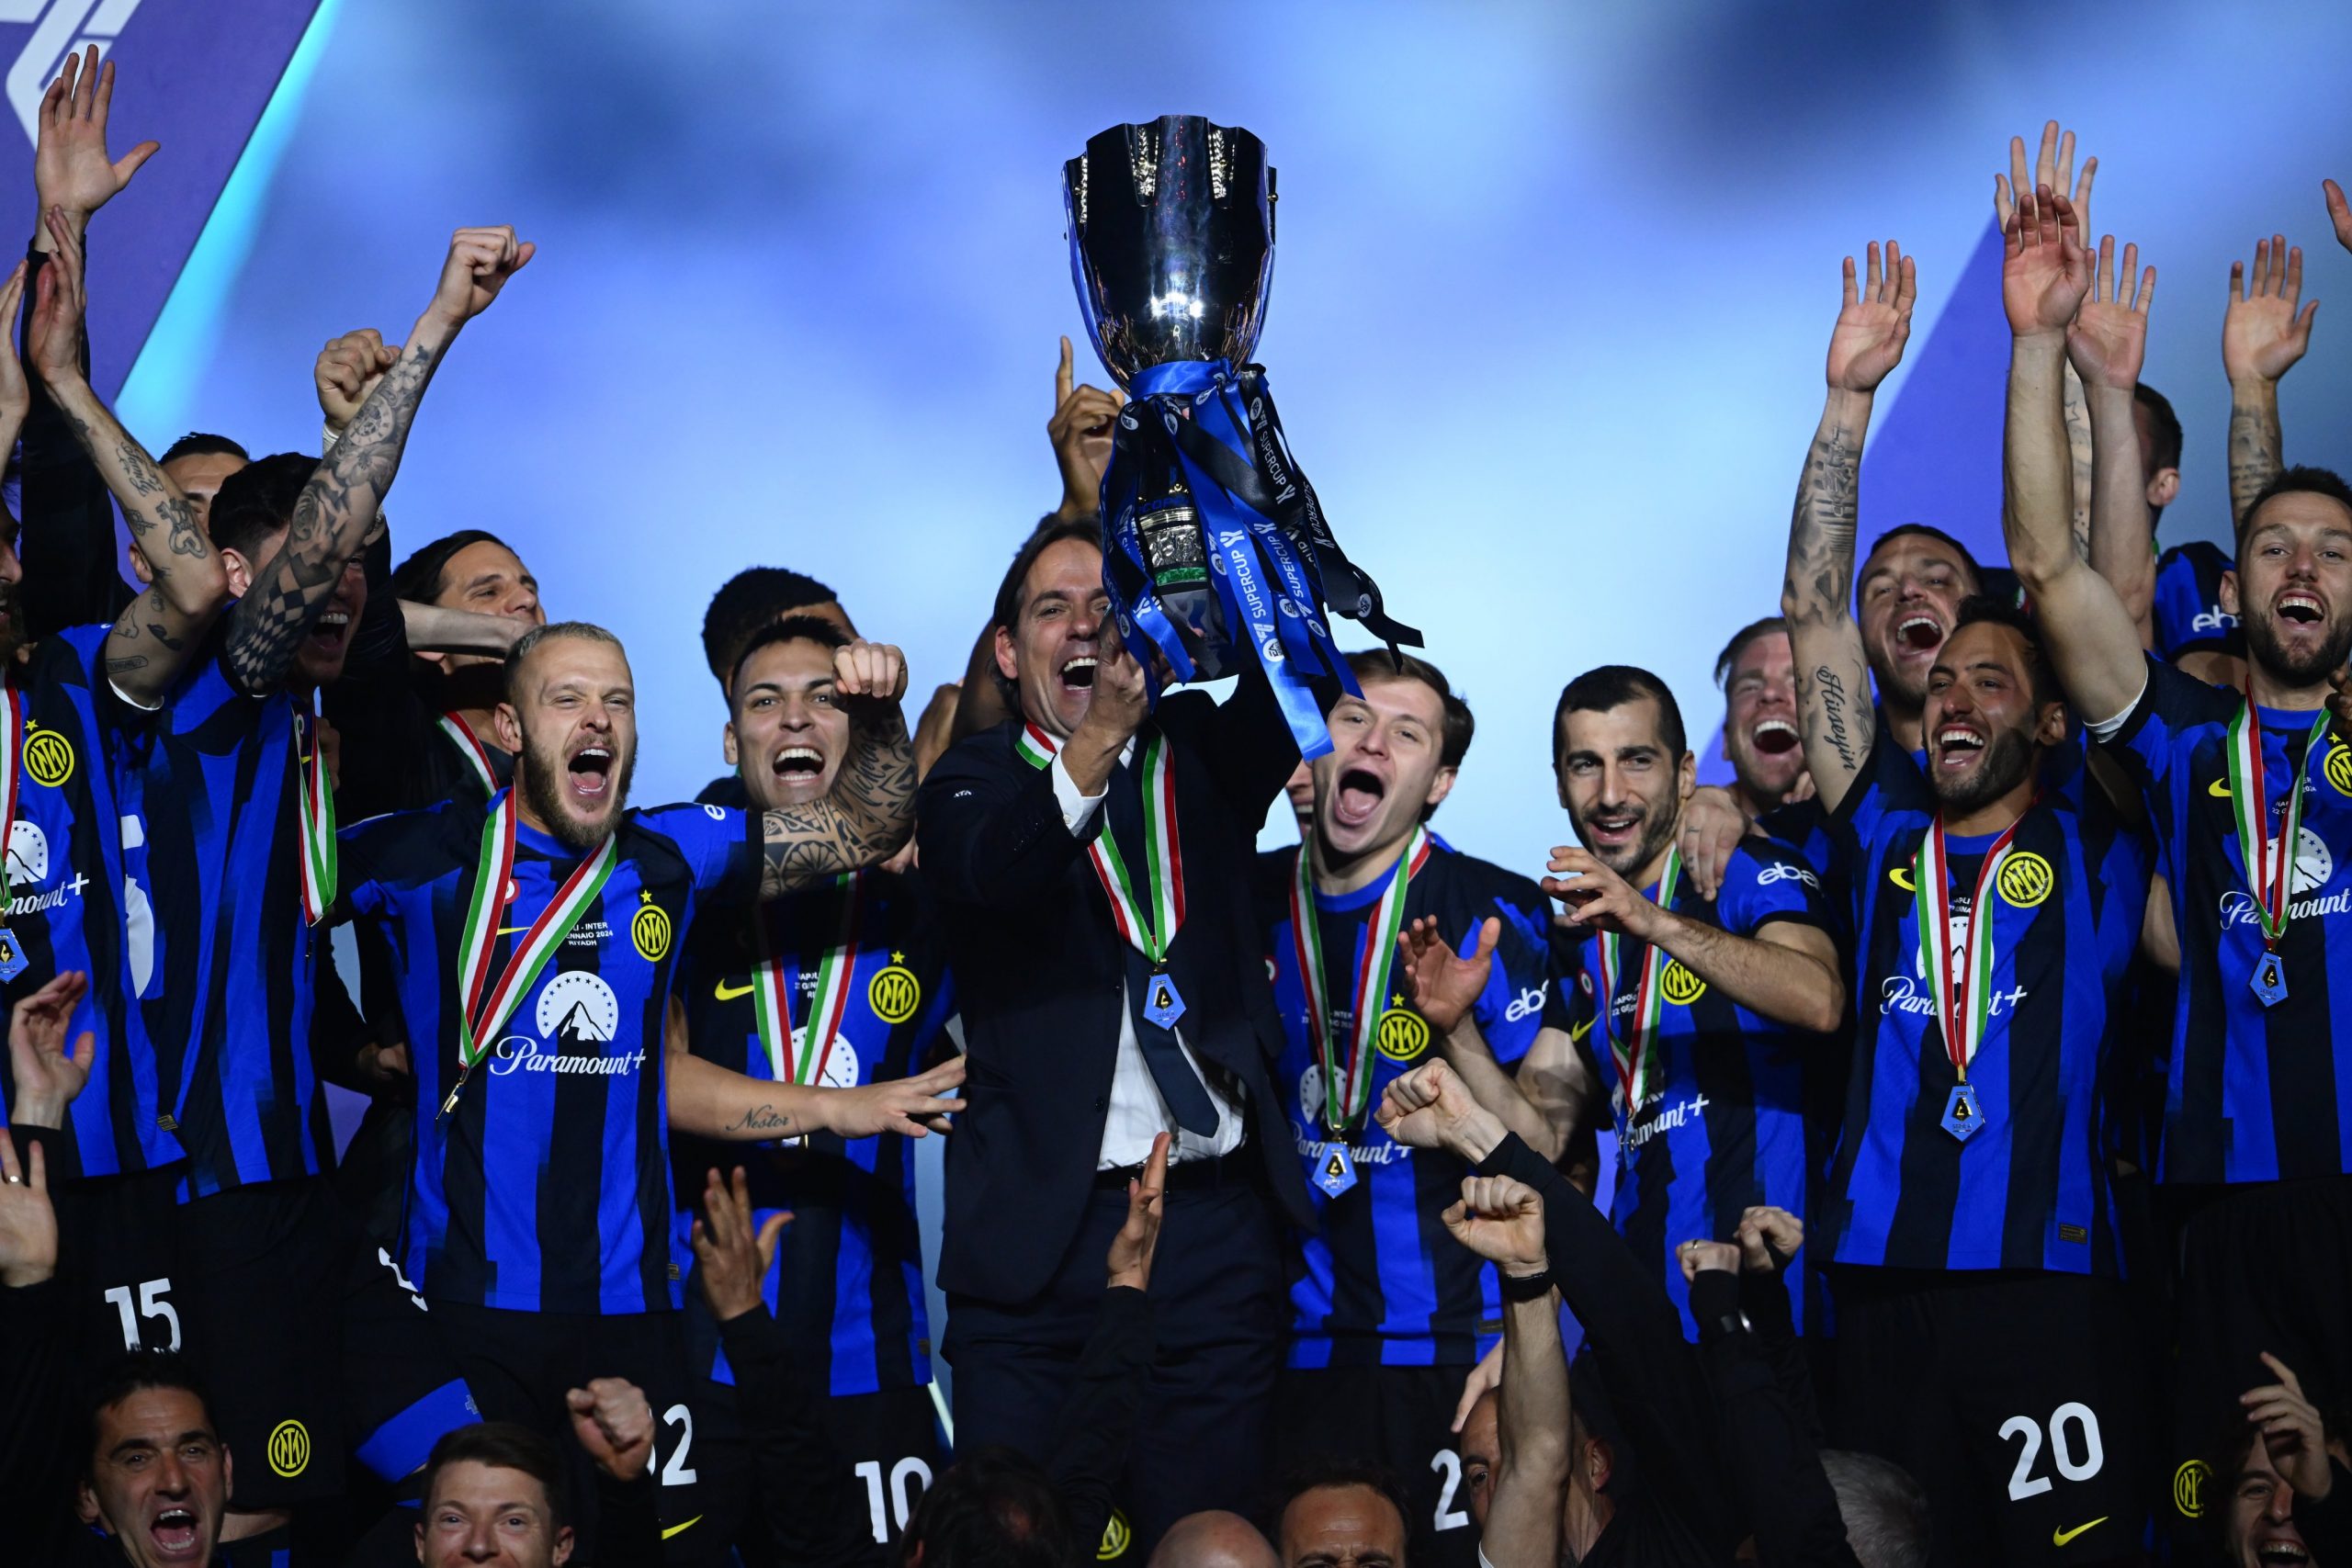 Simone Inzaghi and Inter confirmed their Supercoppa prowess in Riyadh on Monday night. The Nerazzurri took home their third victory in a row.